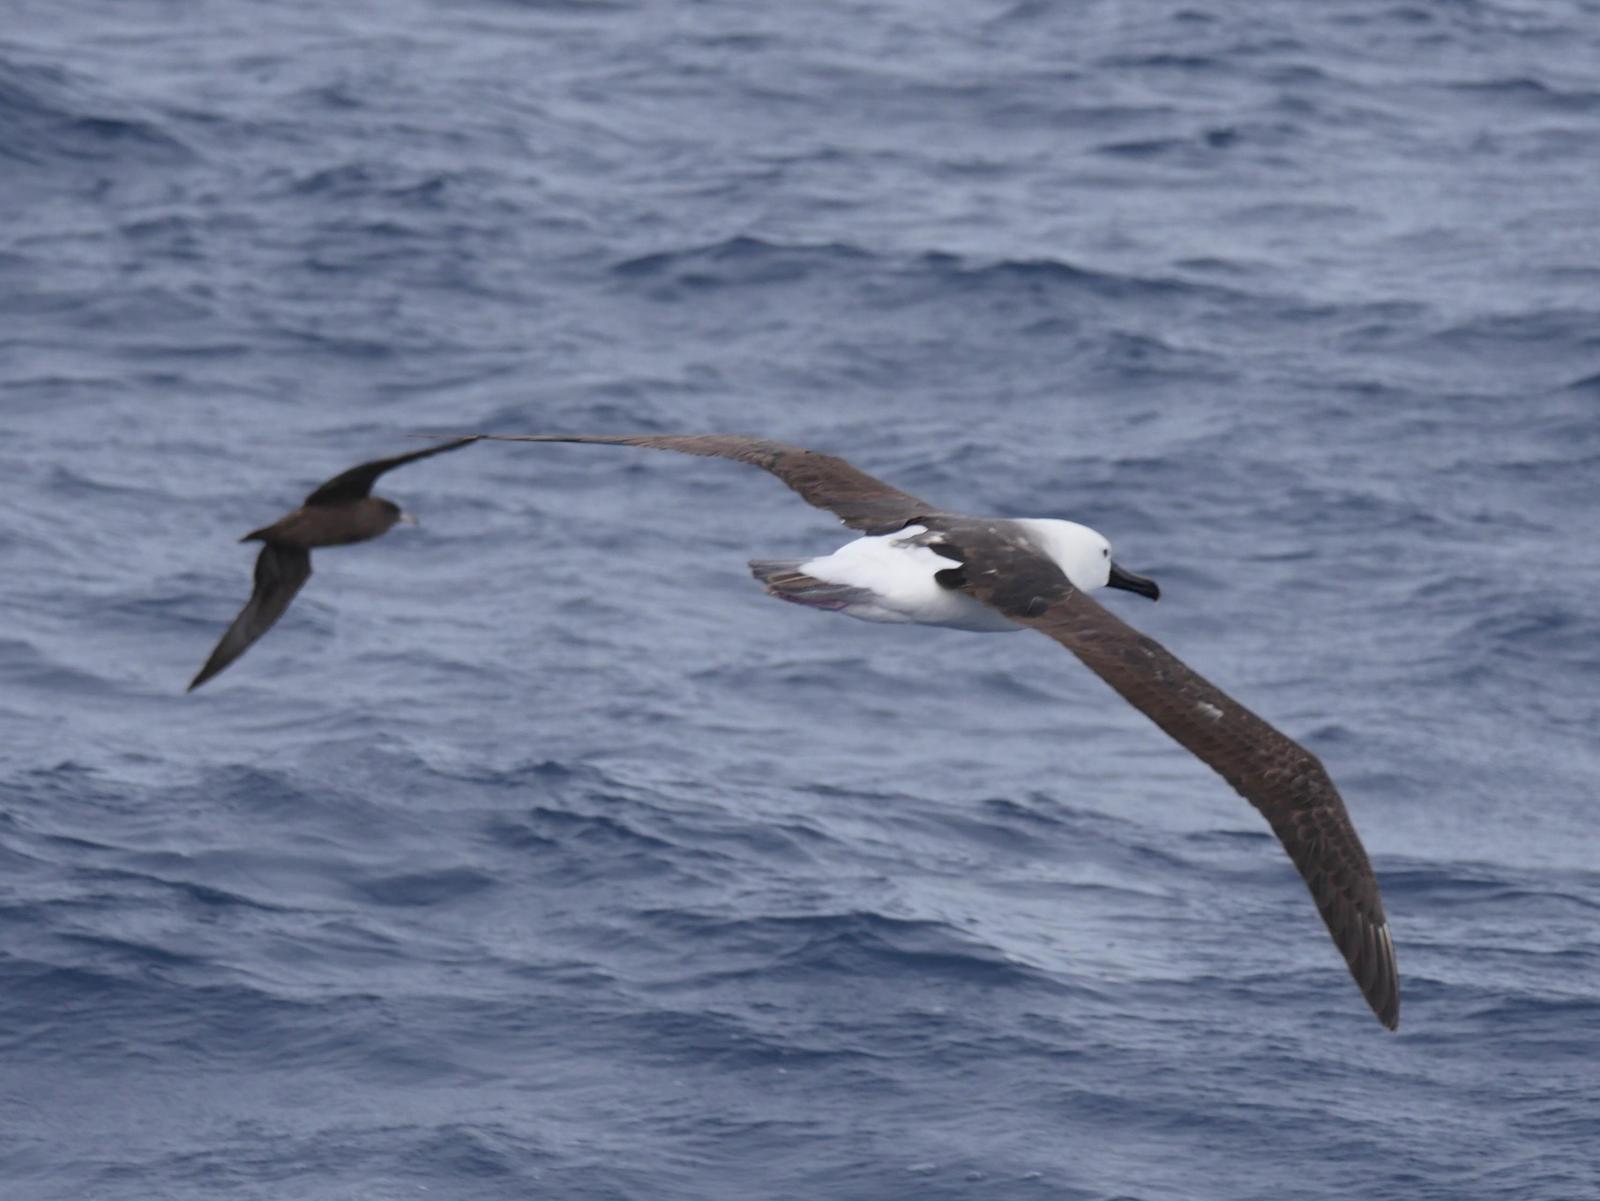 Yellow-nosed Albatross Photo by Peter Lowe